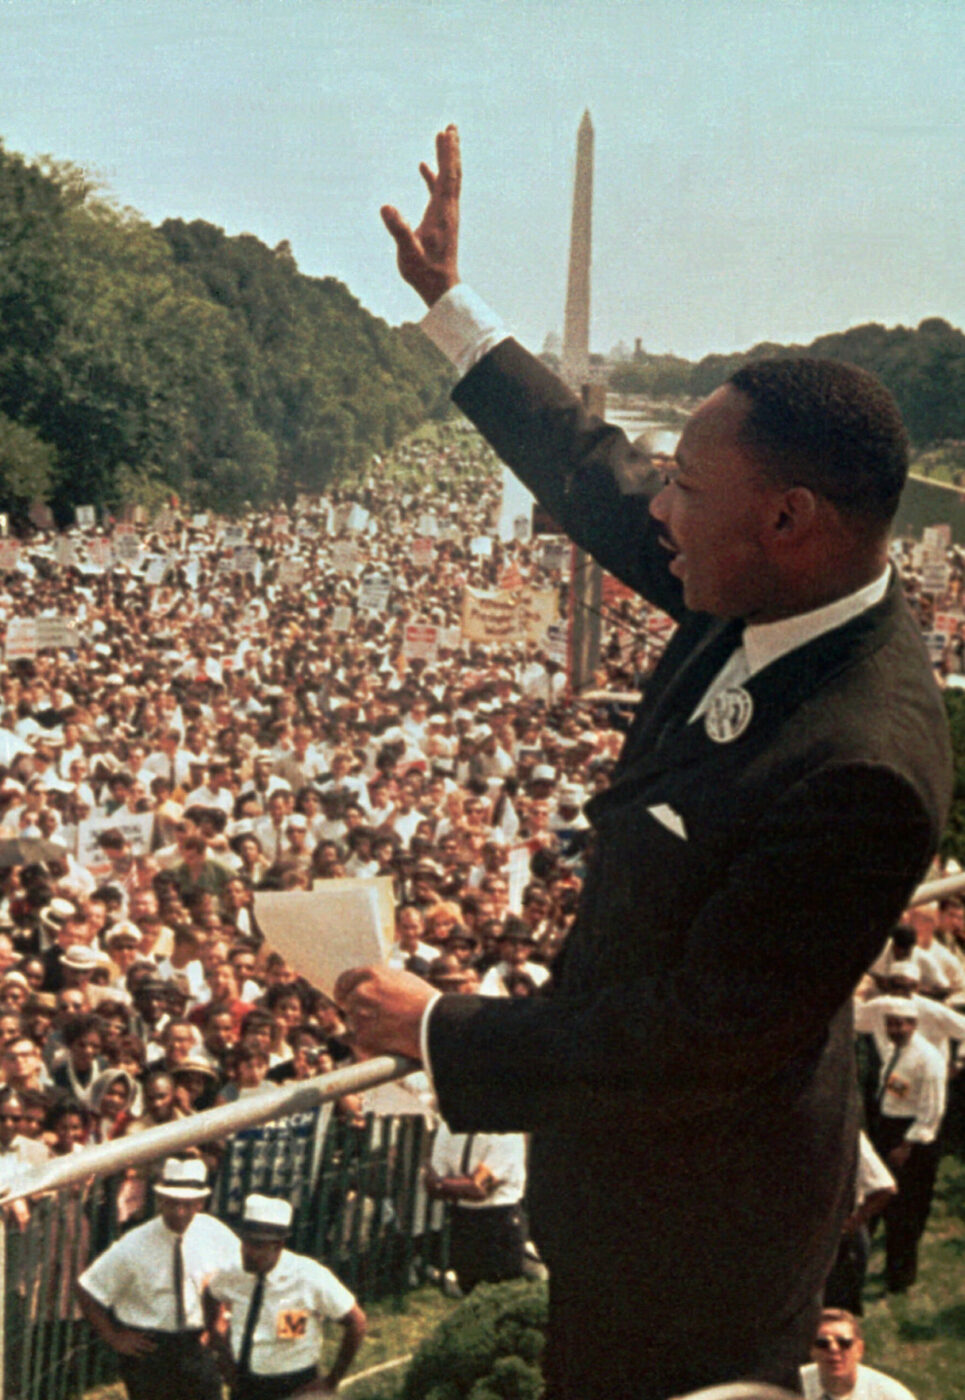 FOR USE ANYTIME - Dr. Martin Luther King Jr. acknowledges the crowd at the Lincoln Memorial for his "I Have a Dream" speech during the March on Washington, D.C. Aug. 28, 1963. Thursday April 4, 1996 will mark the 28th anniversary of his assassination in Memphis, Tenn. The Washington Monument is in background. (AP Photo/File)